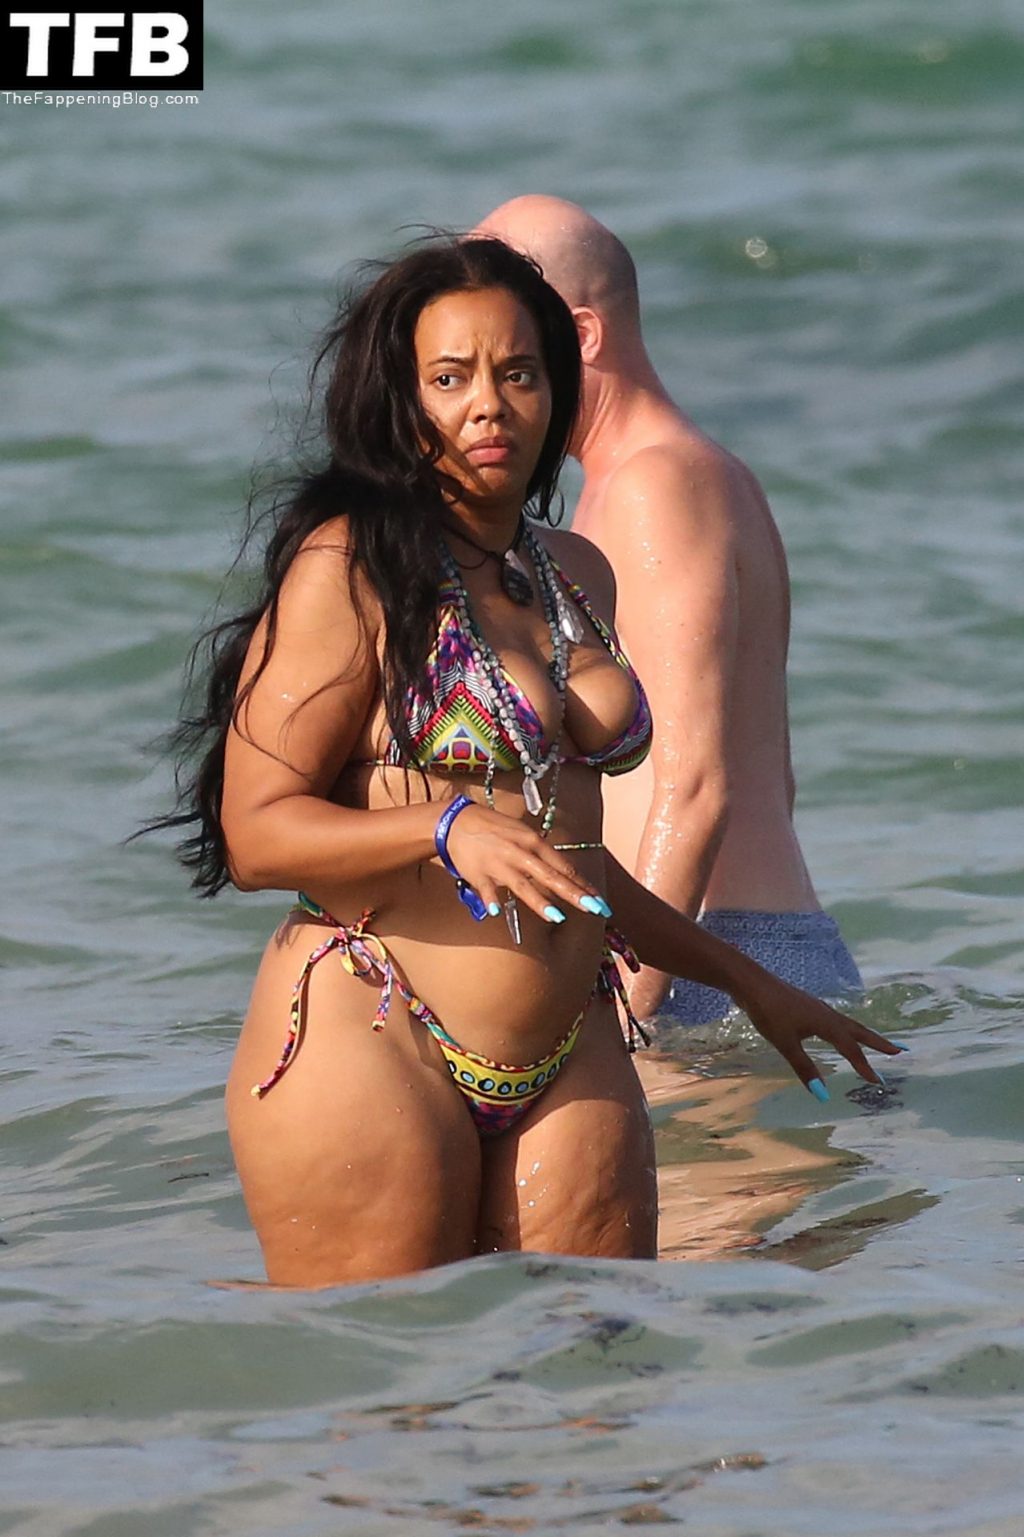 Angela Simmons Shows Off Her Curves on the Beach in Miami (18 Photos)